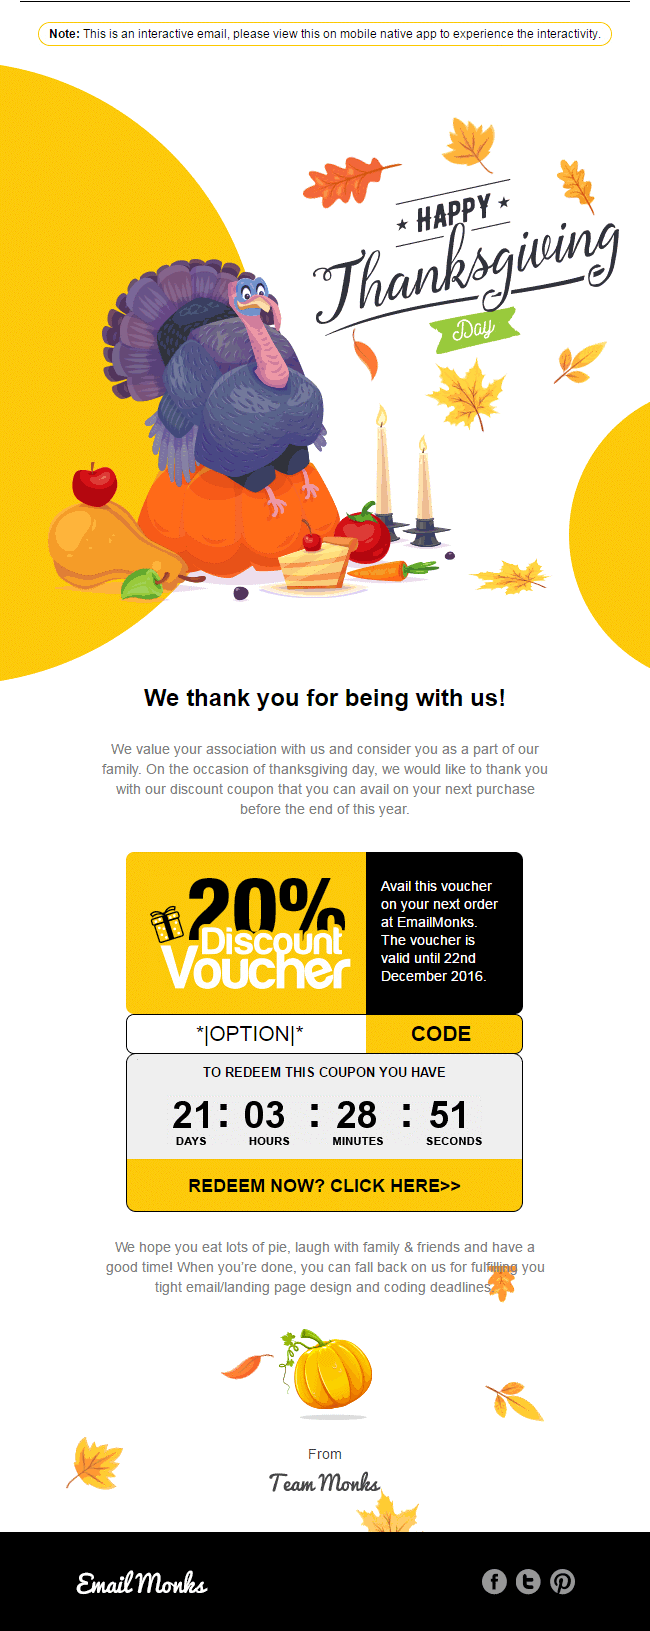 Thanksgiving email -EmailMonks